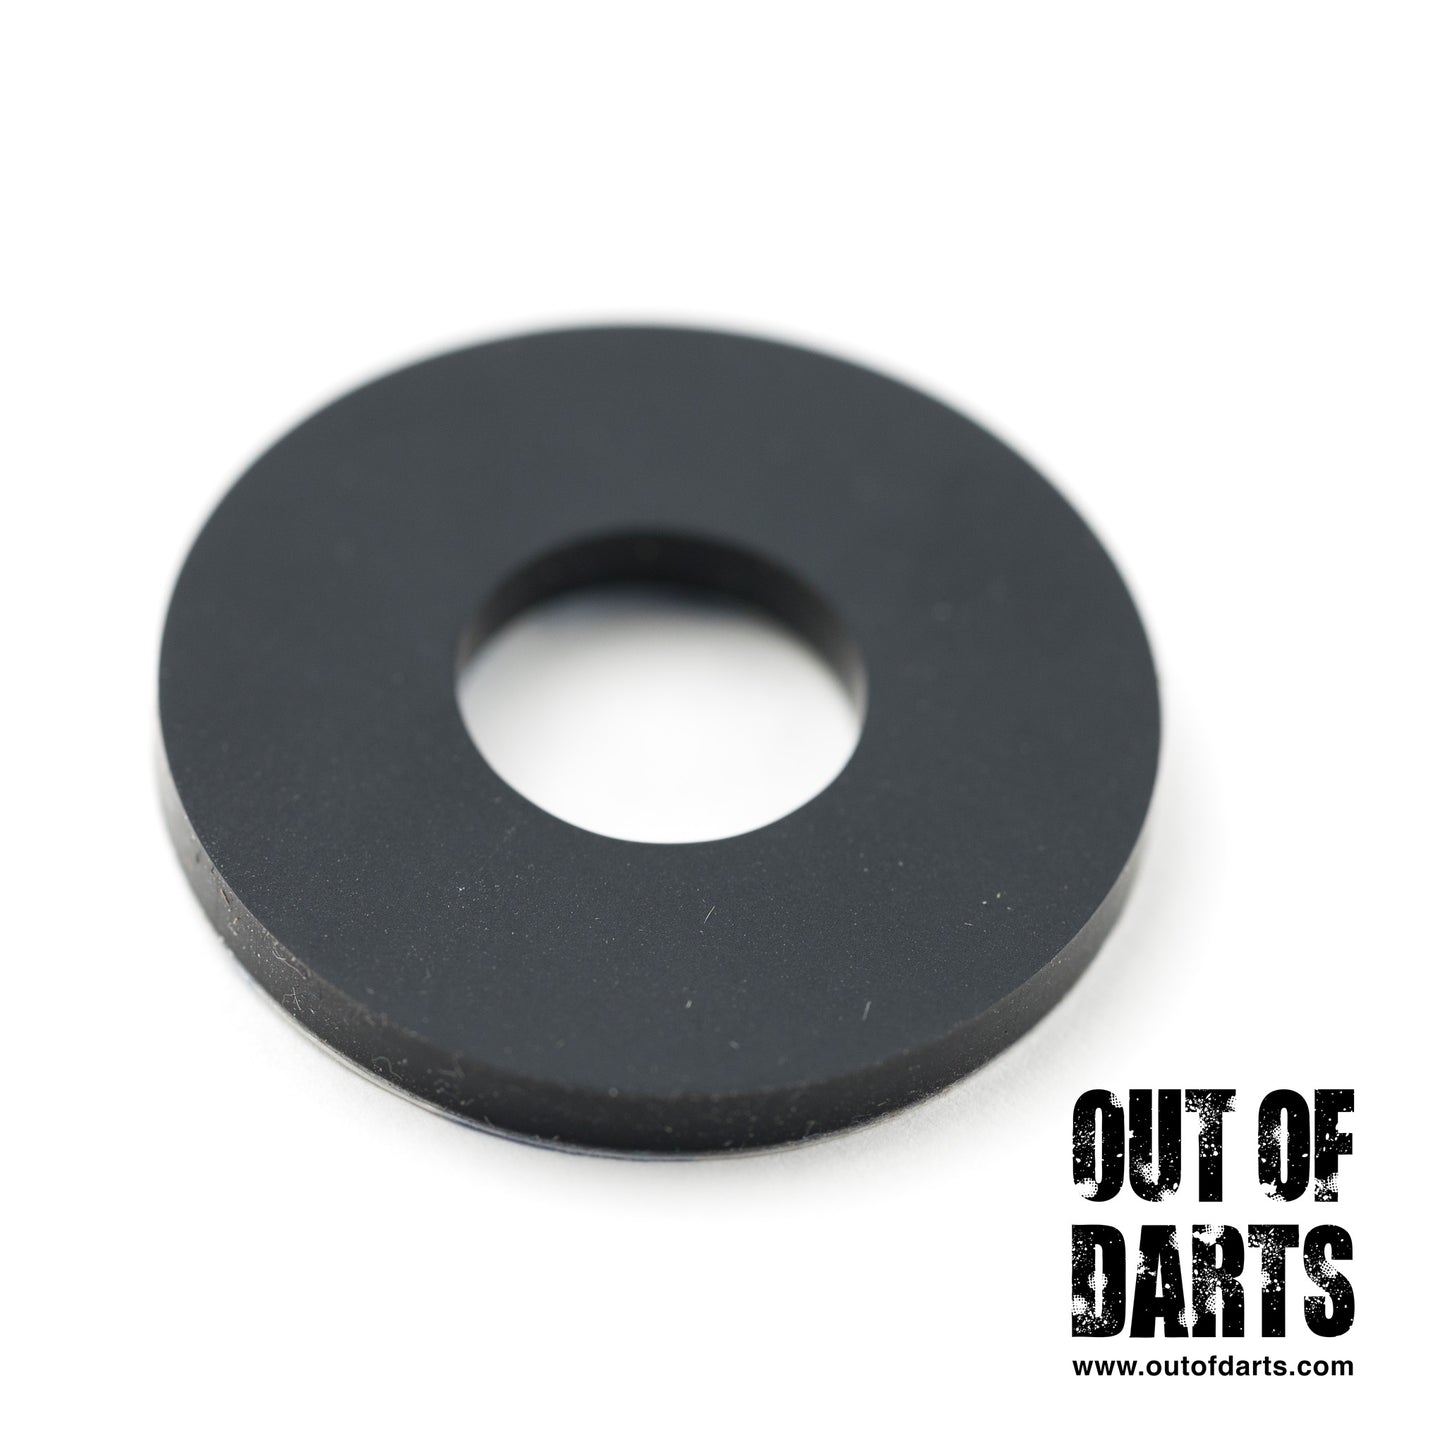 Replacement Adhesive-Backed Silicone Shockpad / Plunger Pad